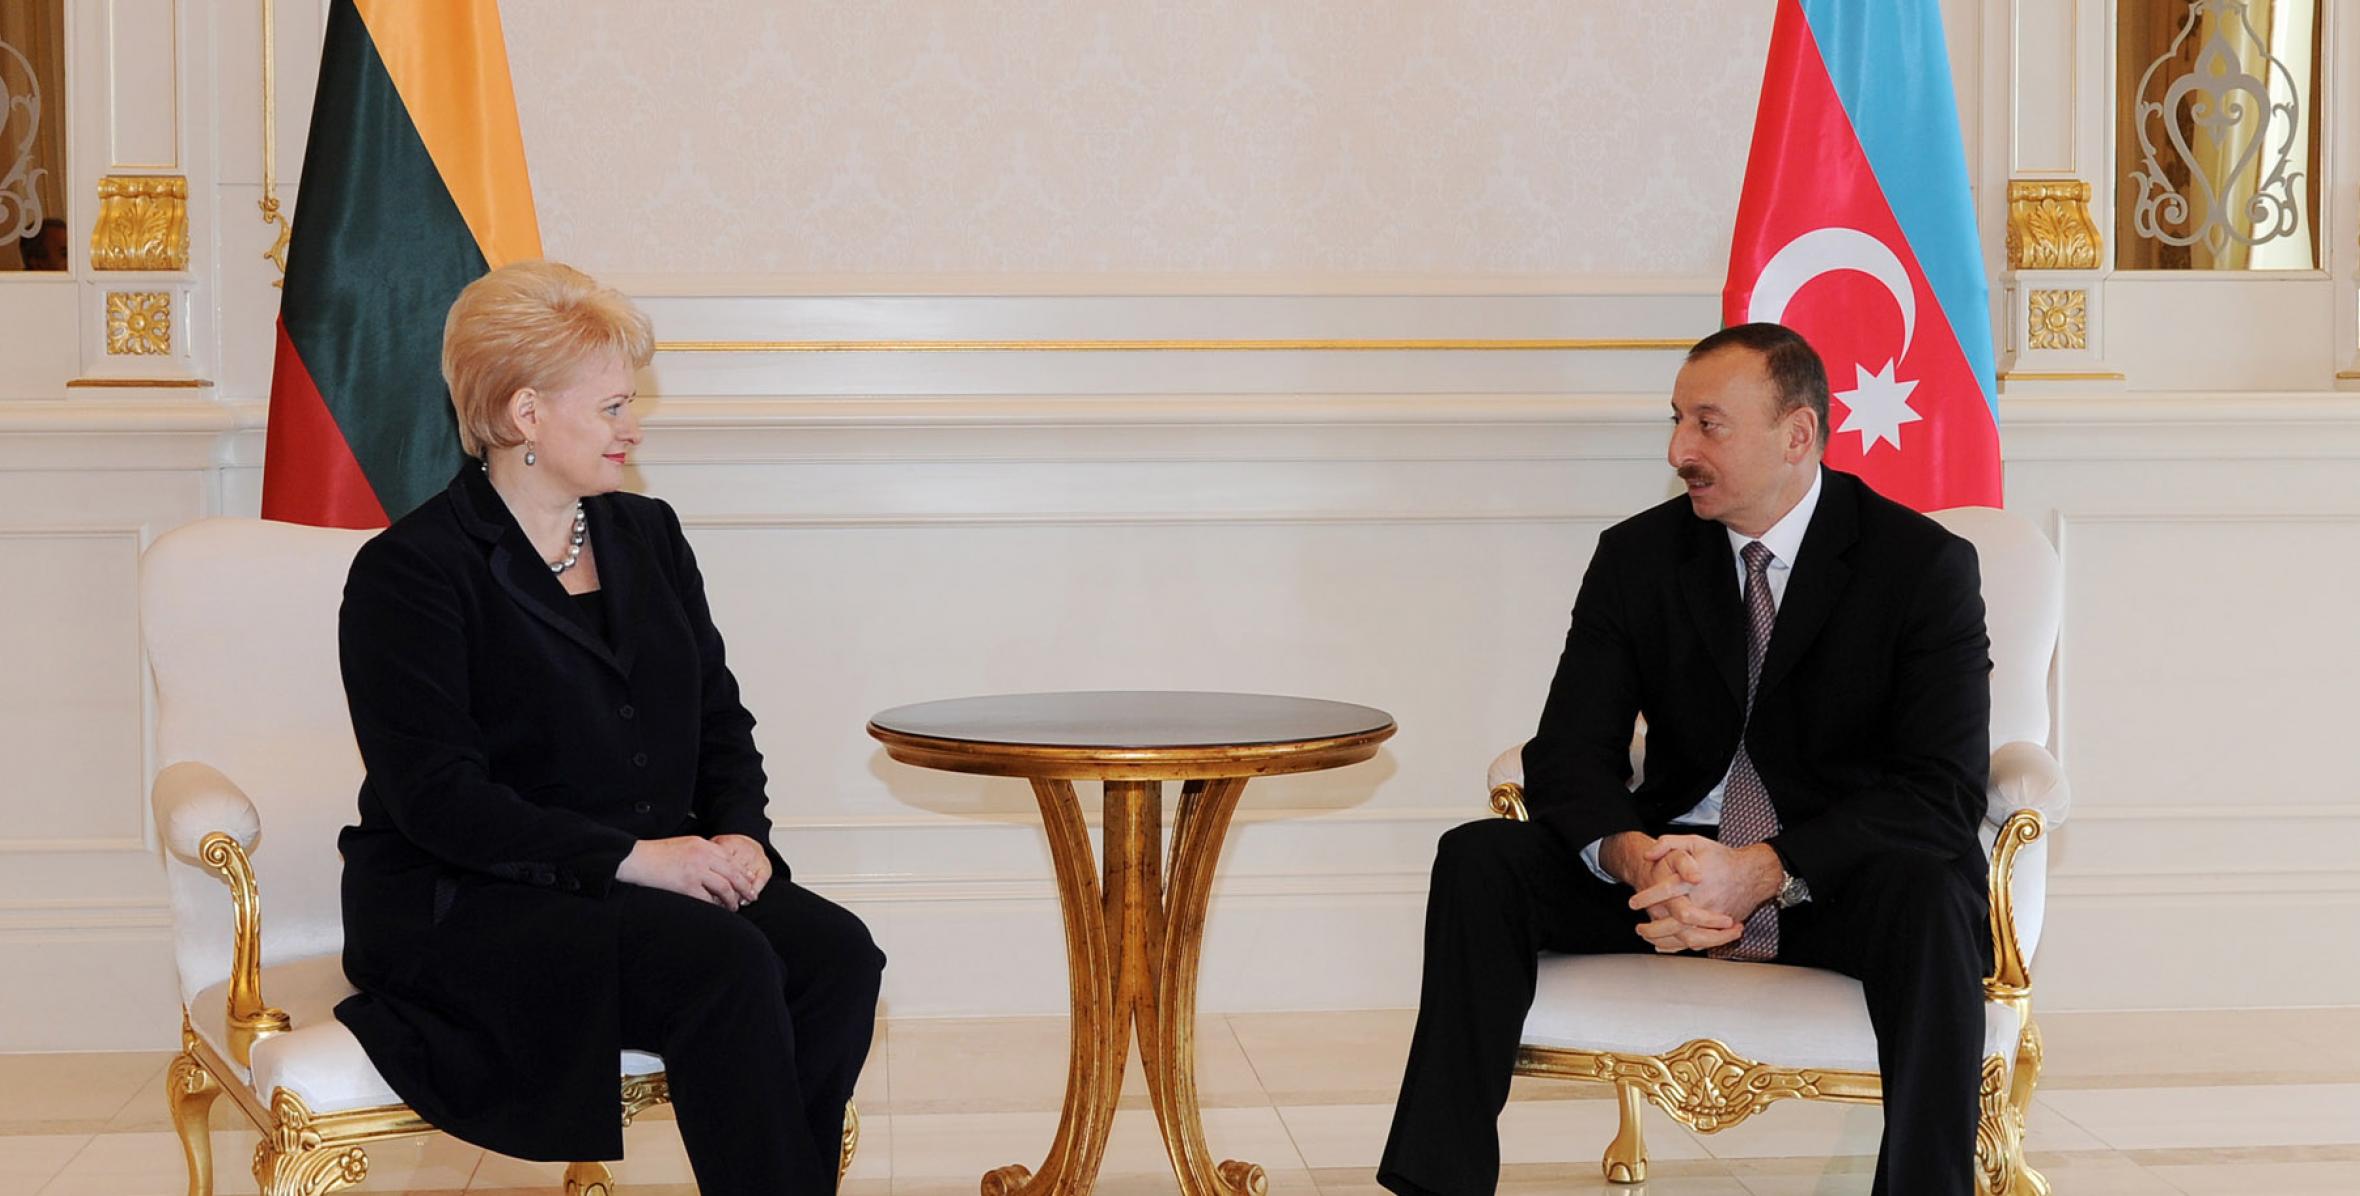 Ilham Aliyev and President of Lithuania Dalia Grybauskaitė had a face-to-face meeting